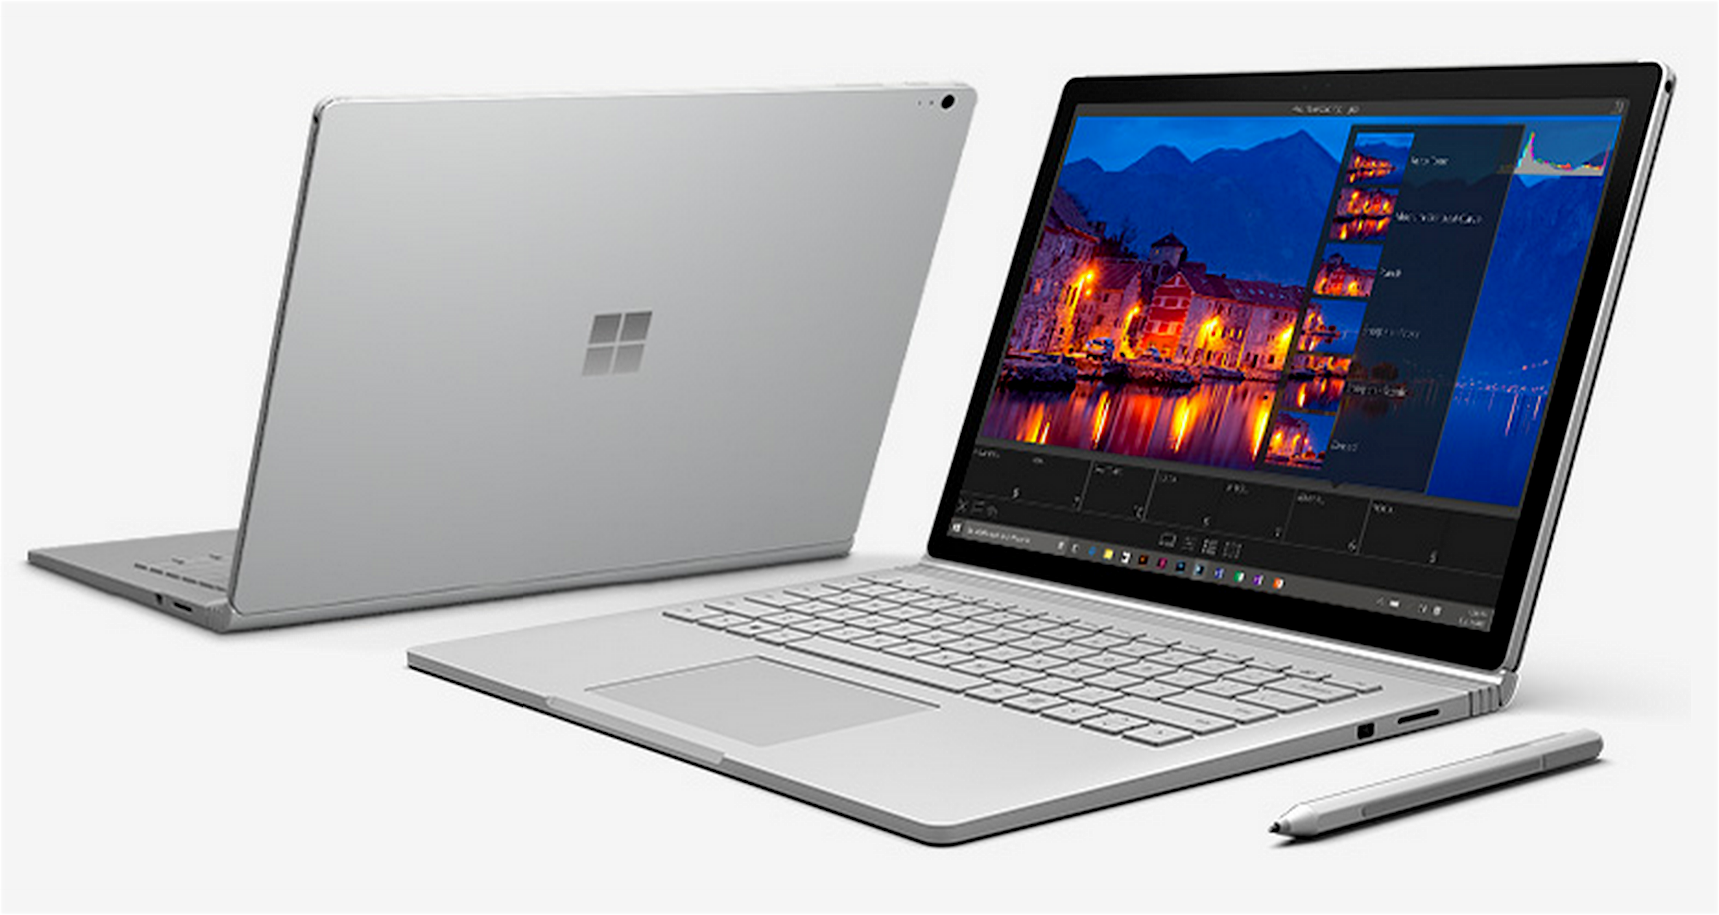 The Microsoft Surface Book Is a Windows Laptop You'll Actually Want to Use for Editing